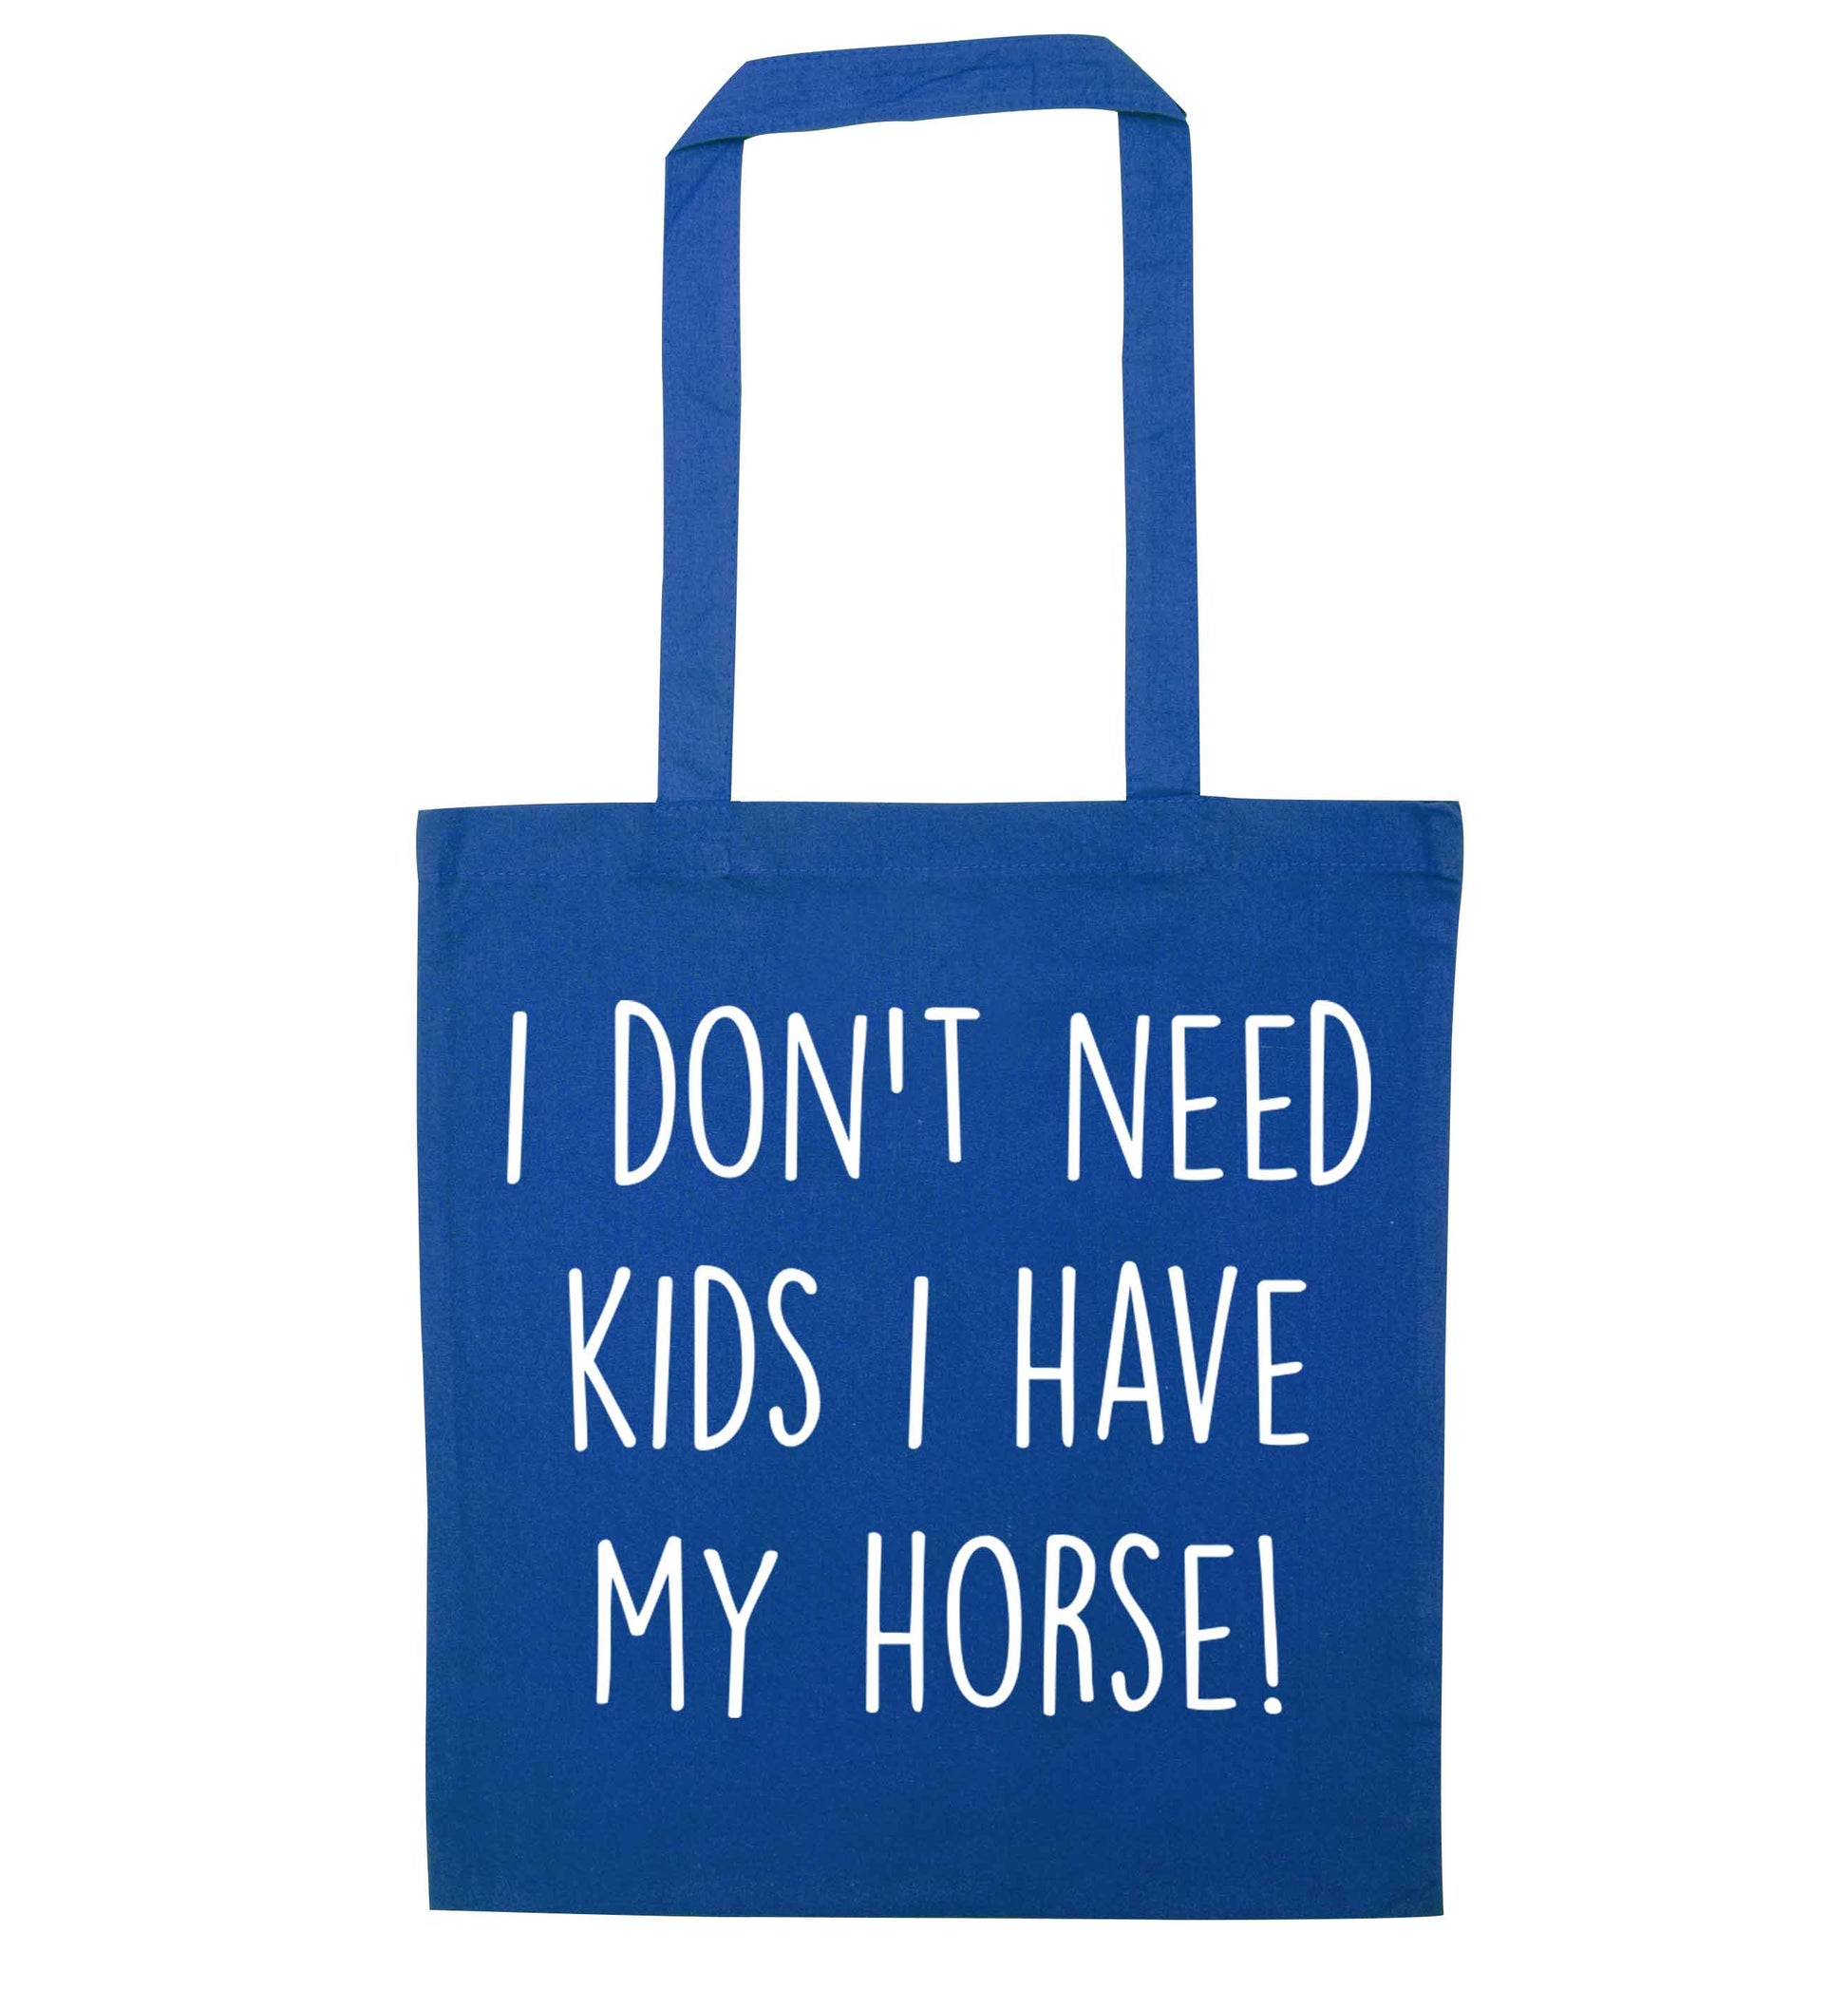 I don't need kids I have my horse blue tote bag